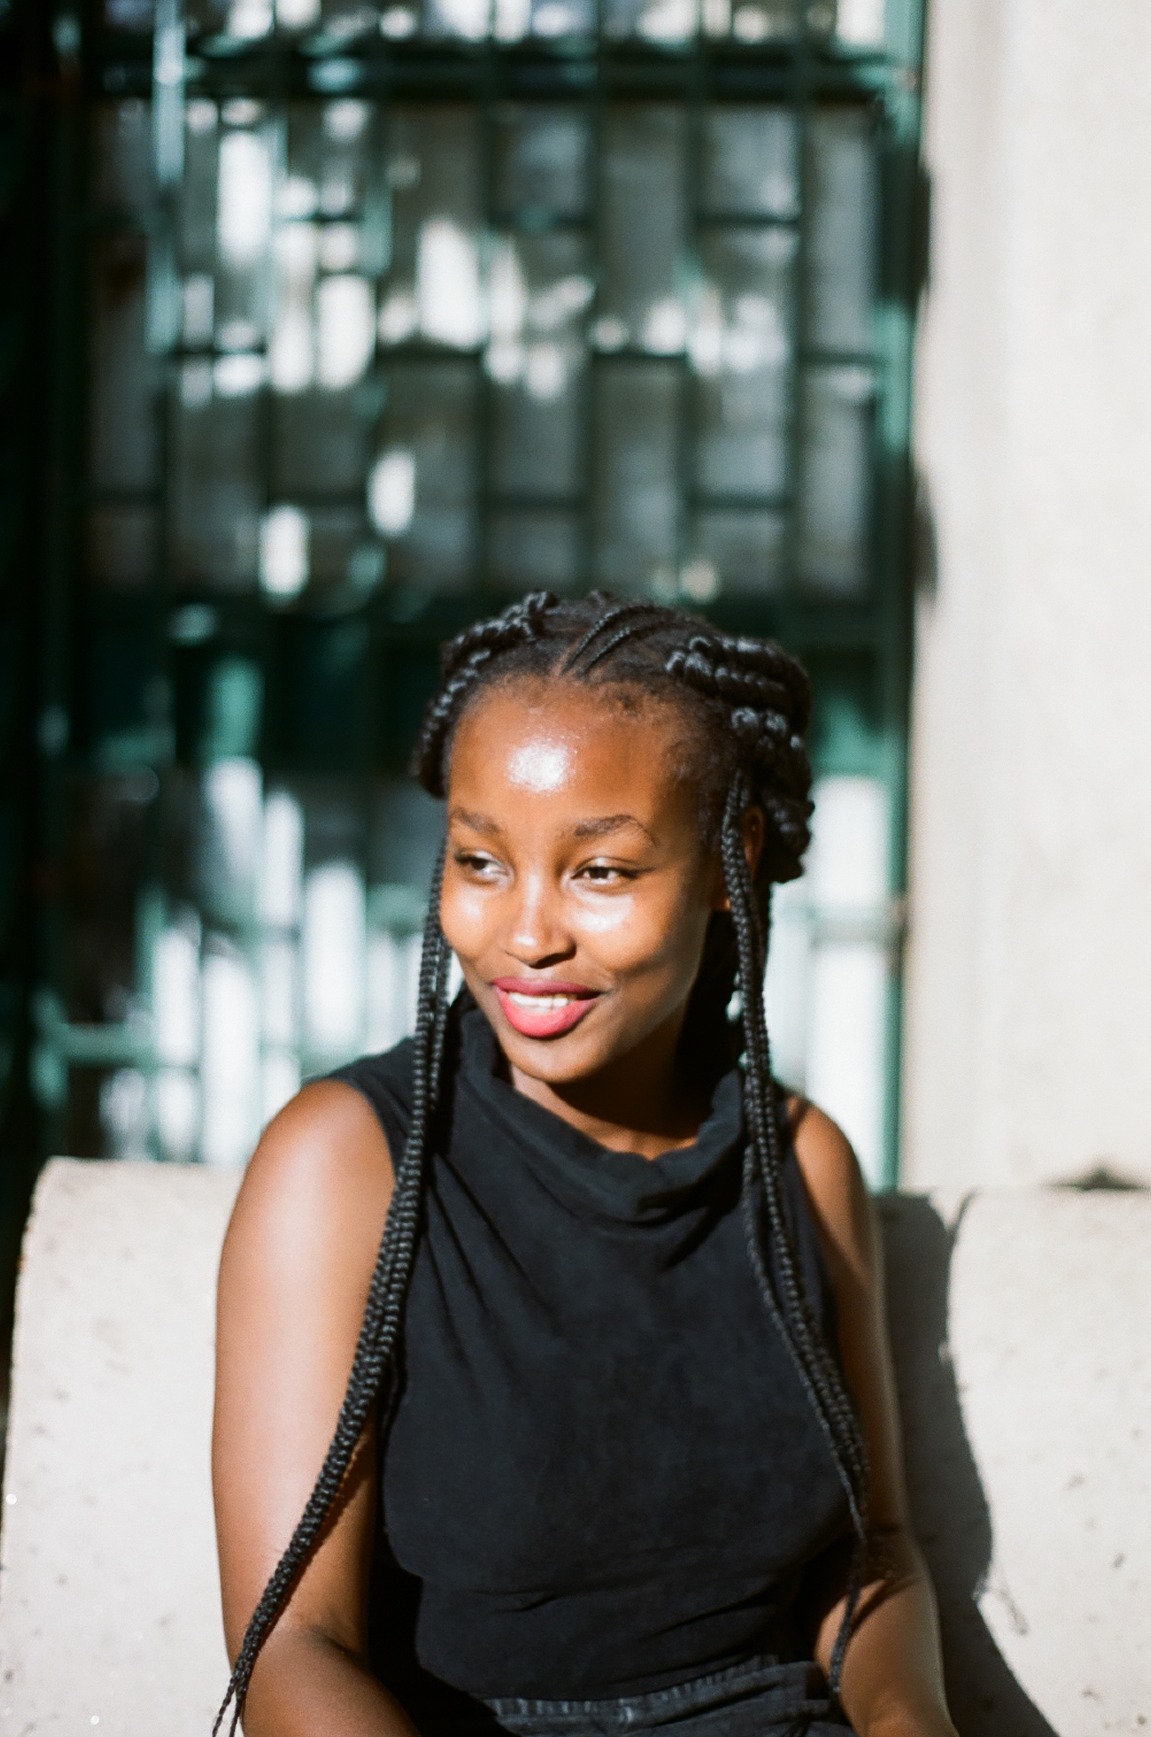 Photo portrait of young African woman smiling into distance with braids and a black top.